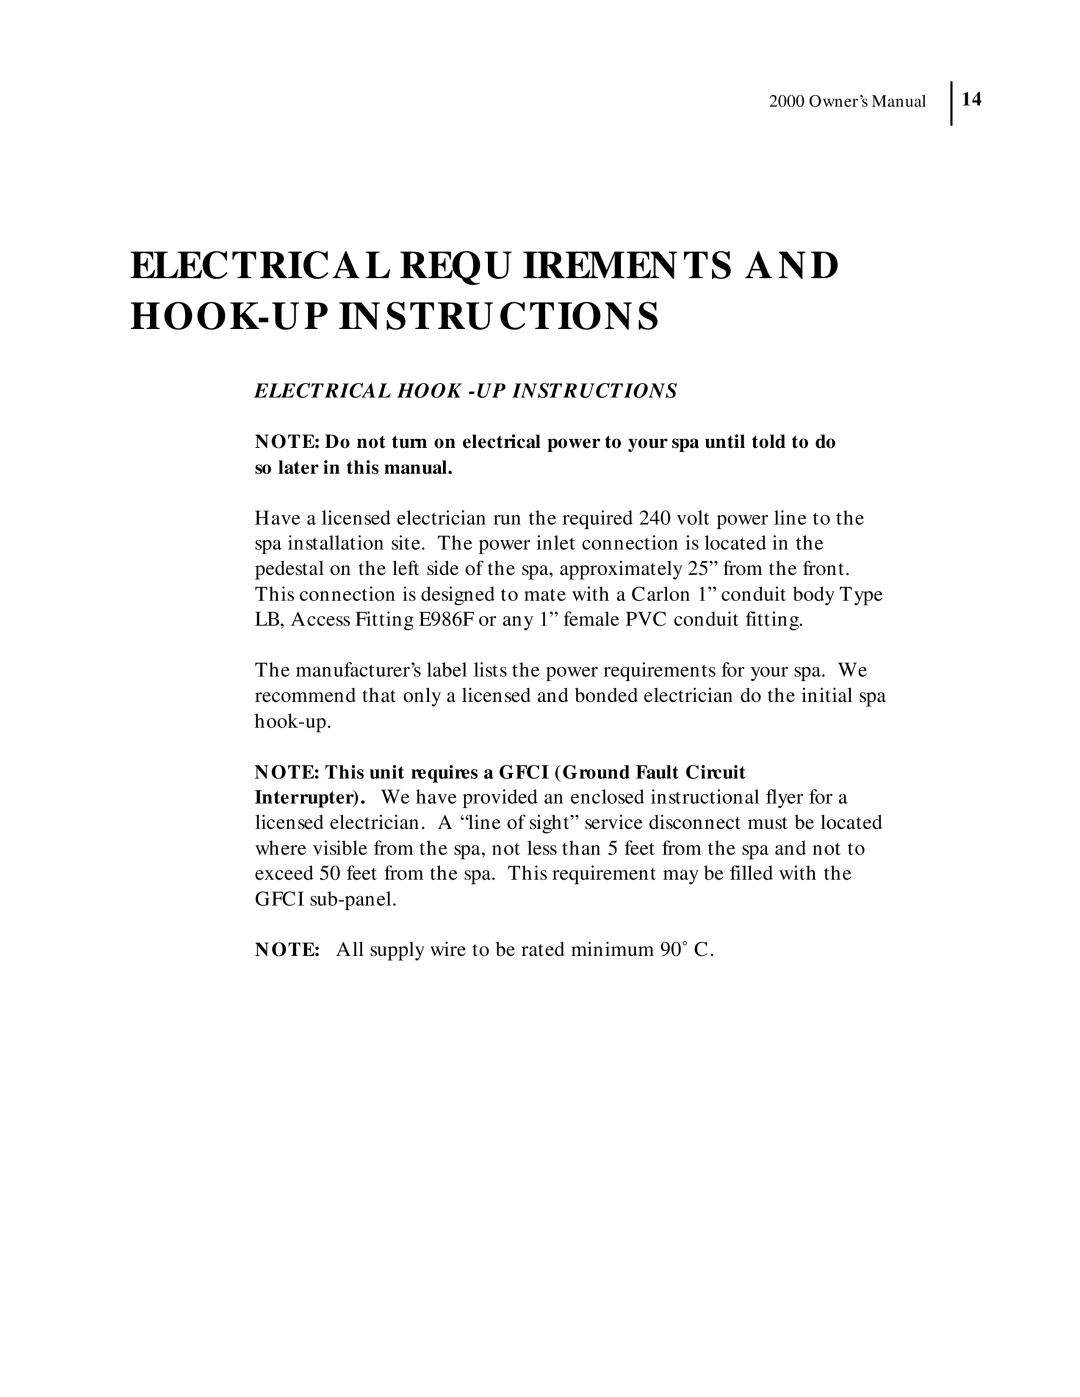 Dimension One Spas 2000 Model manual Electrical Requ Irements And Hook-Upinstructions, Electrical Hook -Upinstructions 